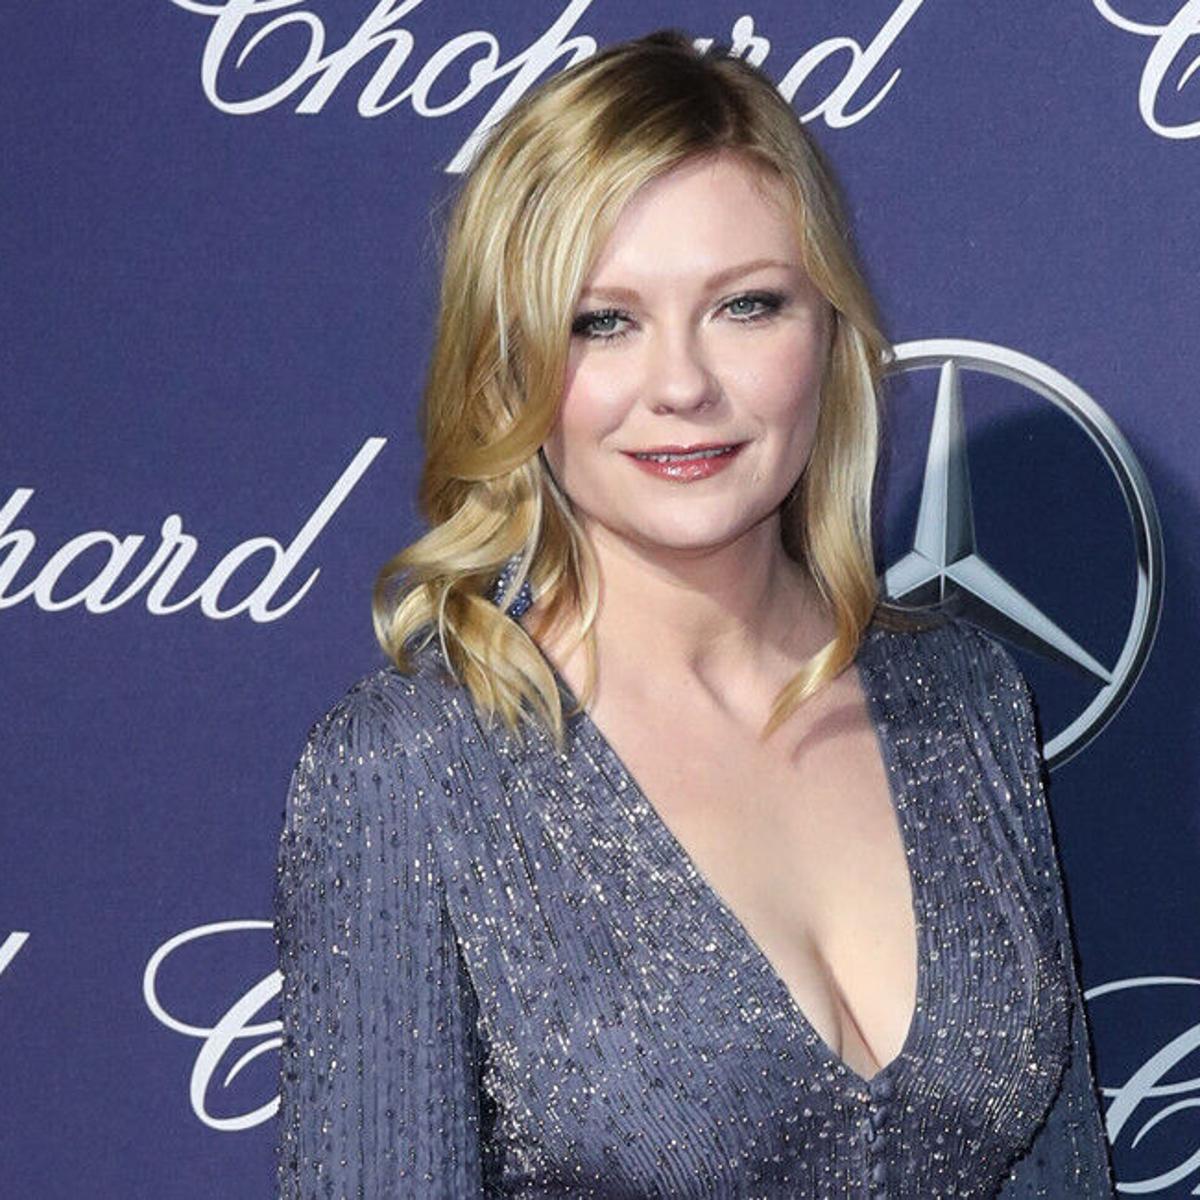 Kirsten Dunst Became a Mother for the Second Time